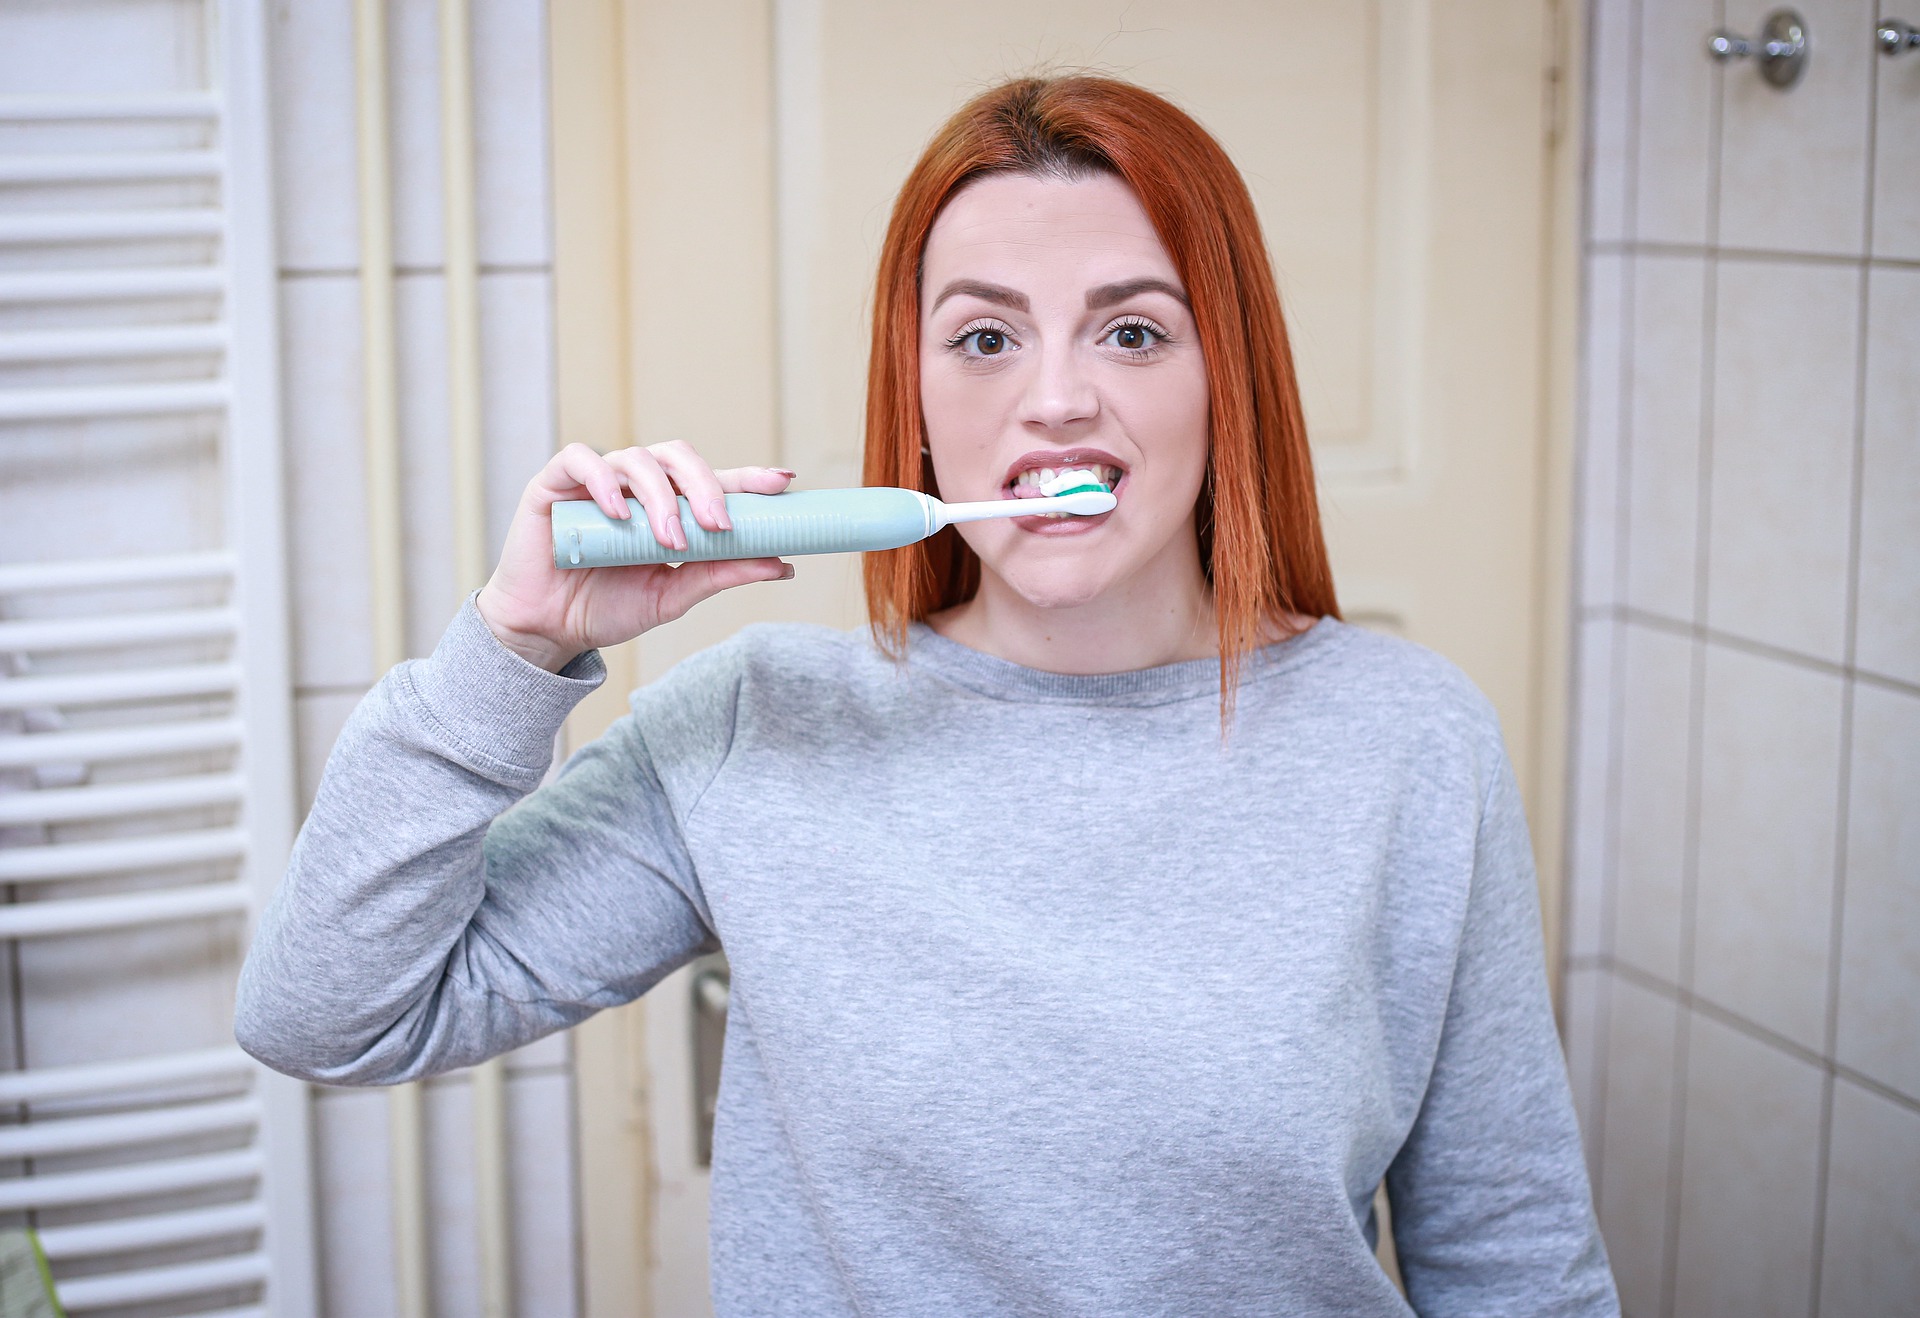 Can You Brush Your Teeth While Water Fasting?